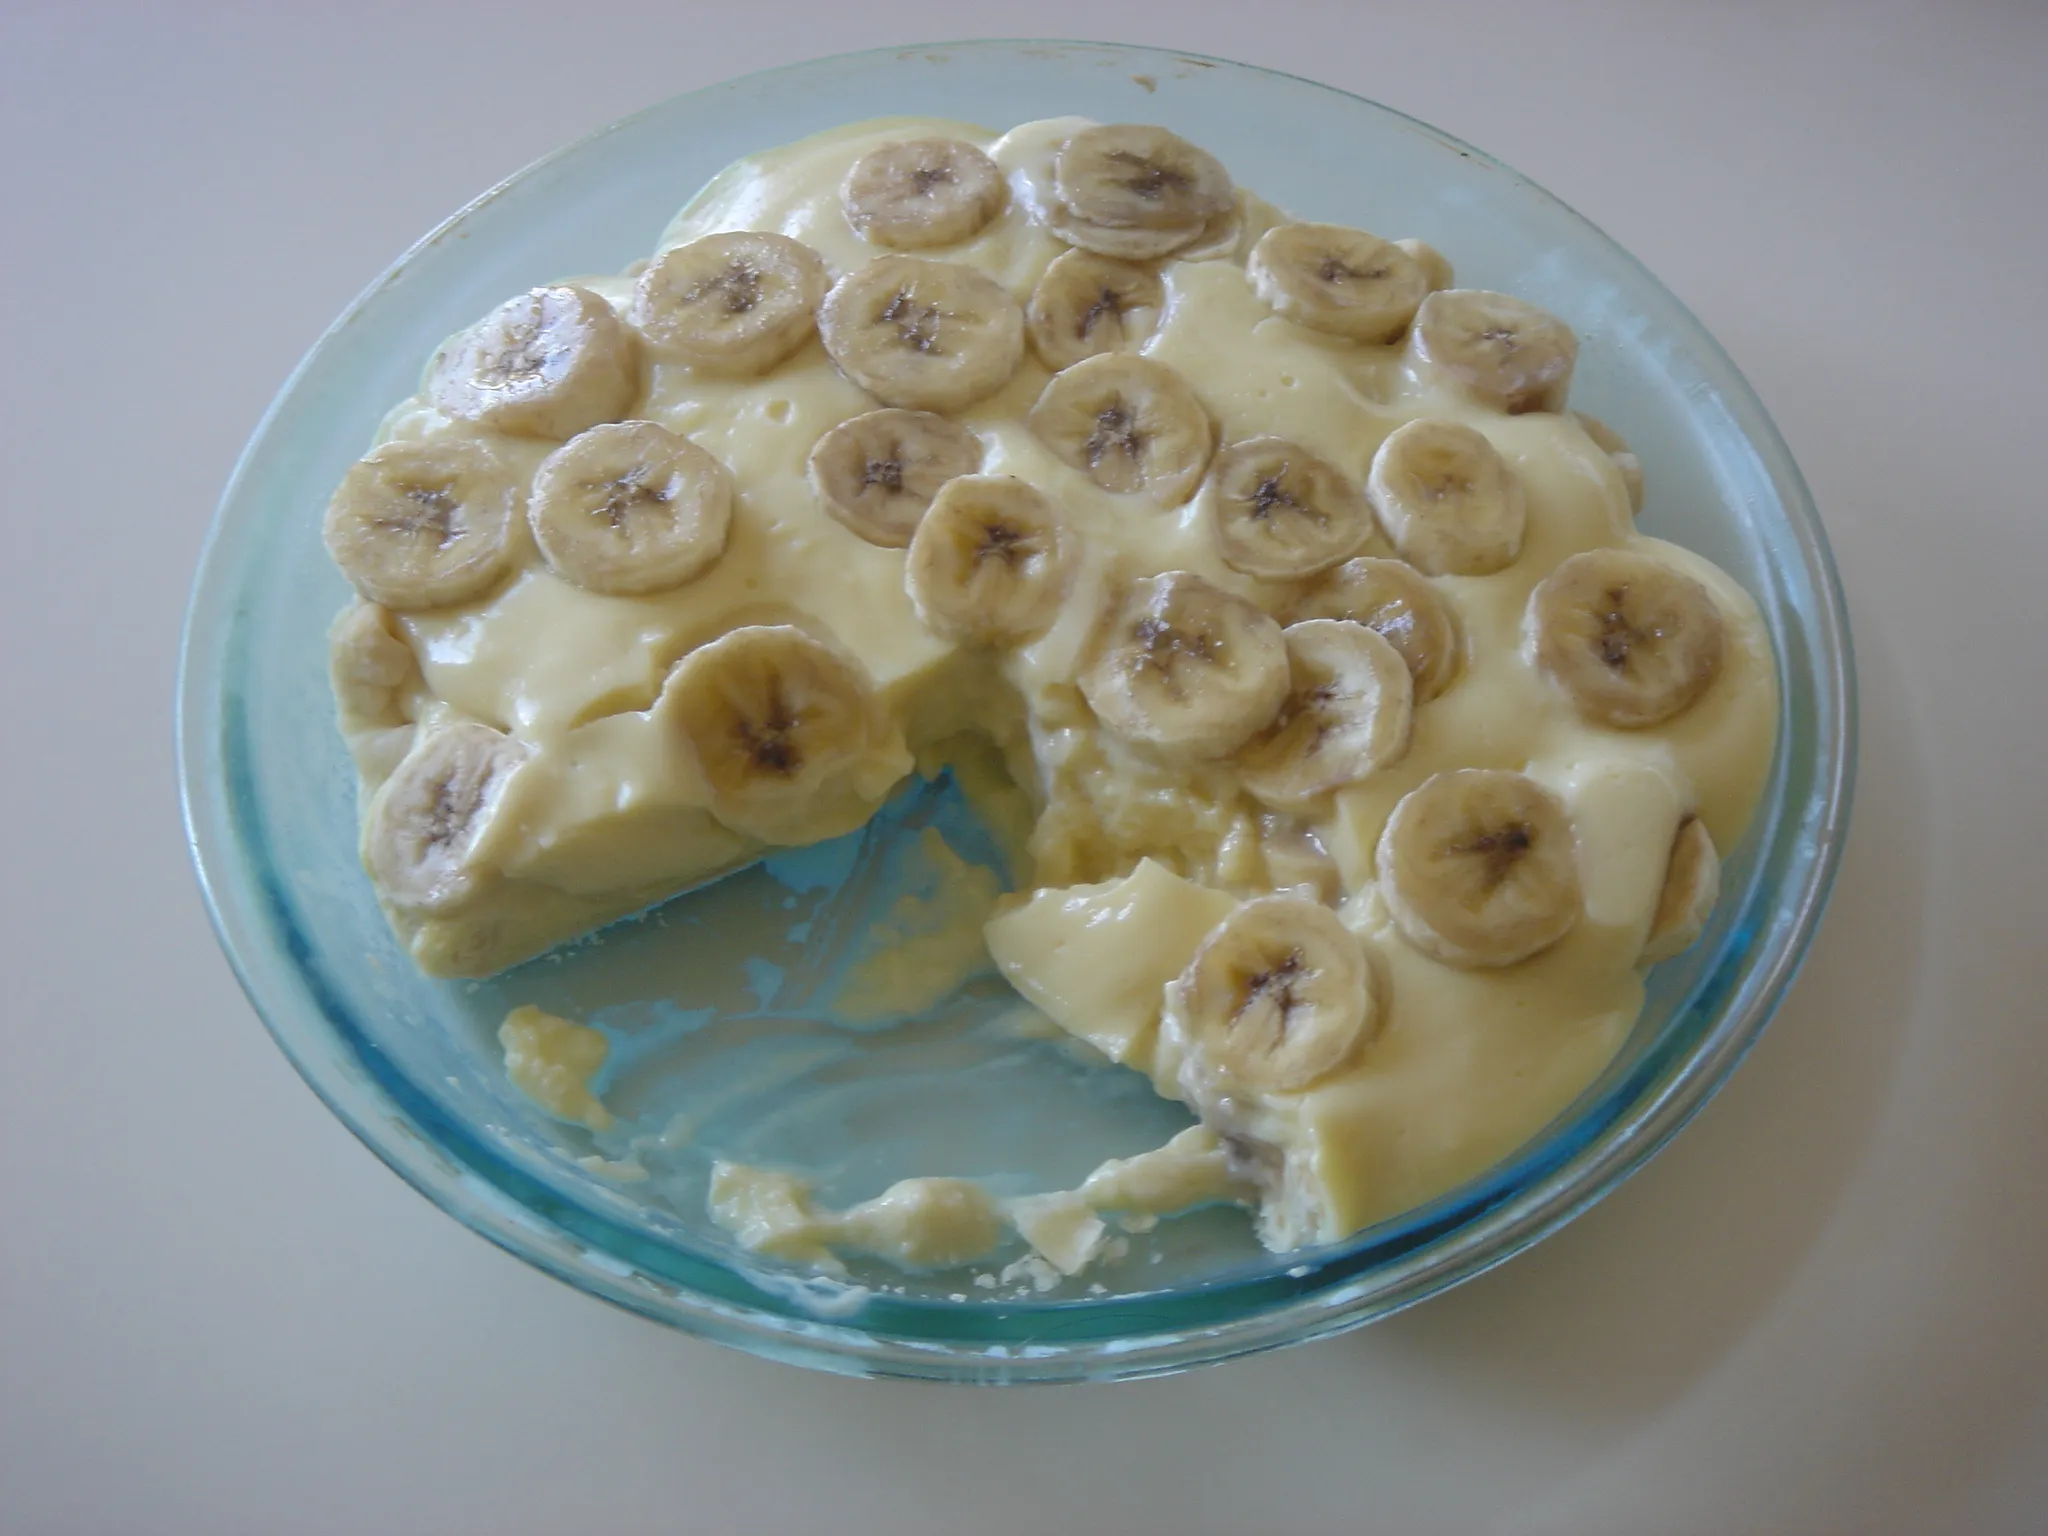 Authentic Southern Banana Pudding Recipe – Delicious Homemade Treat